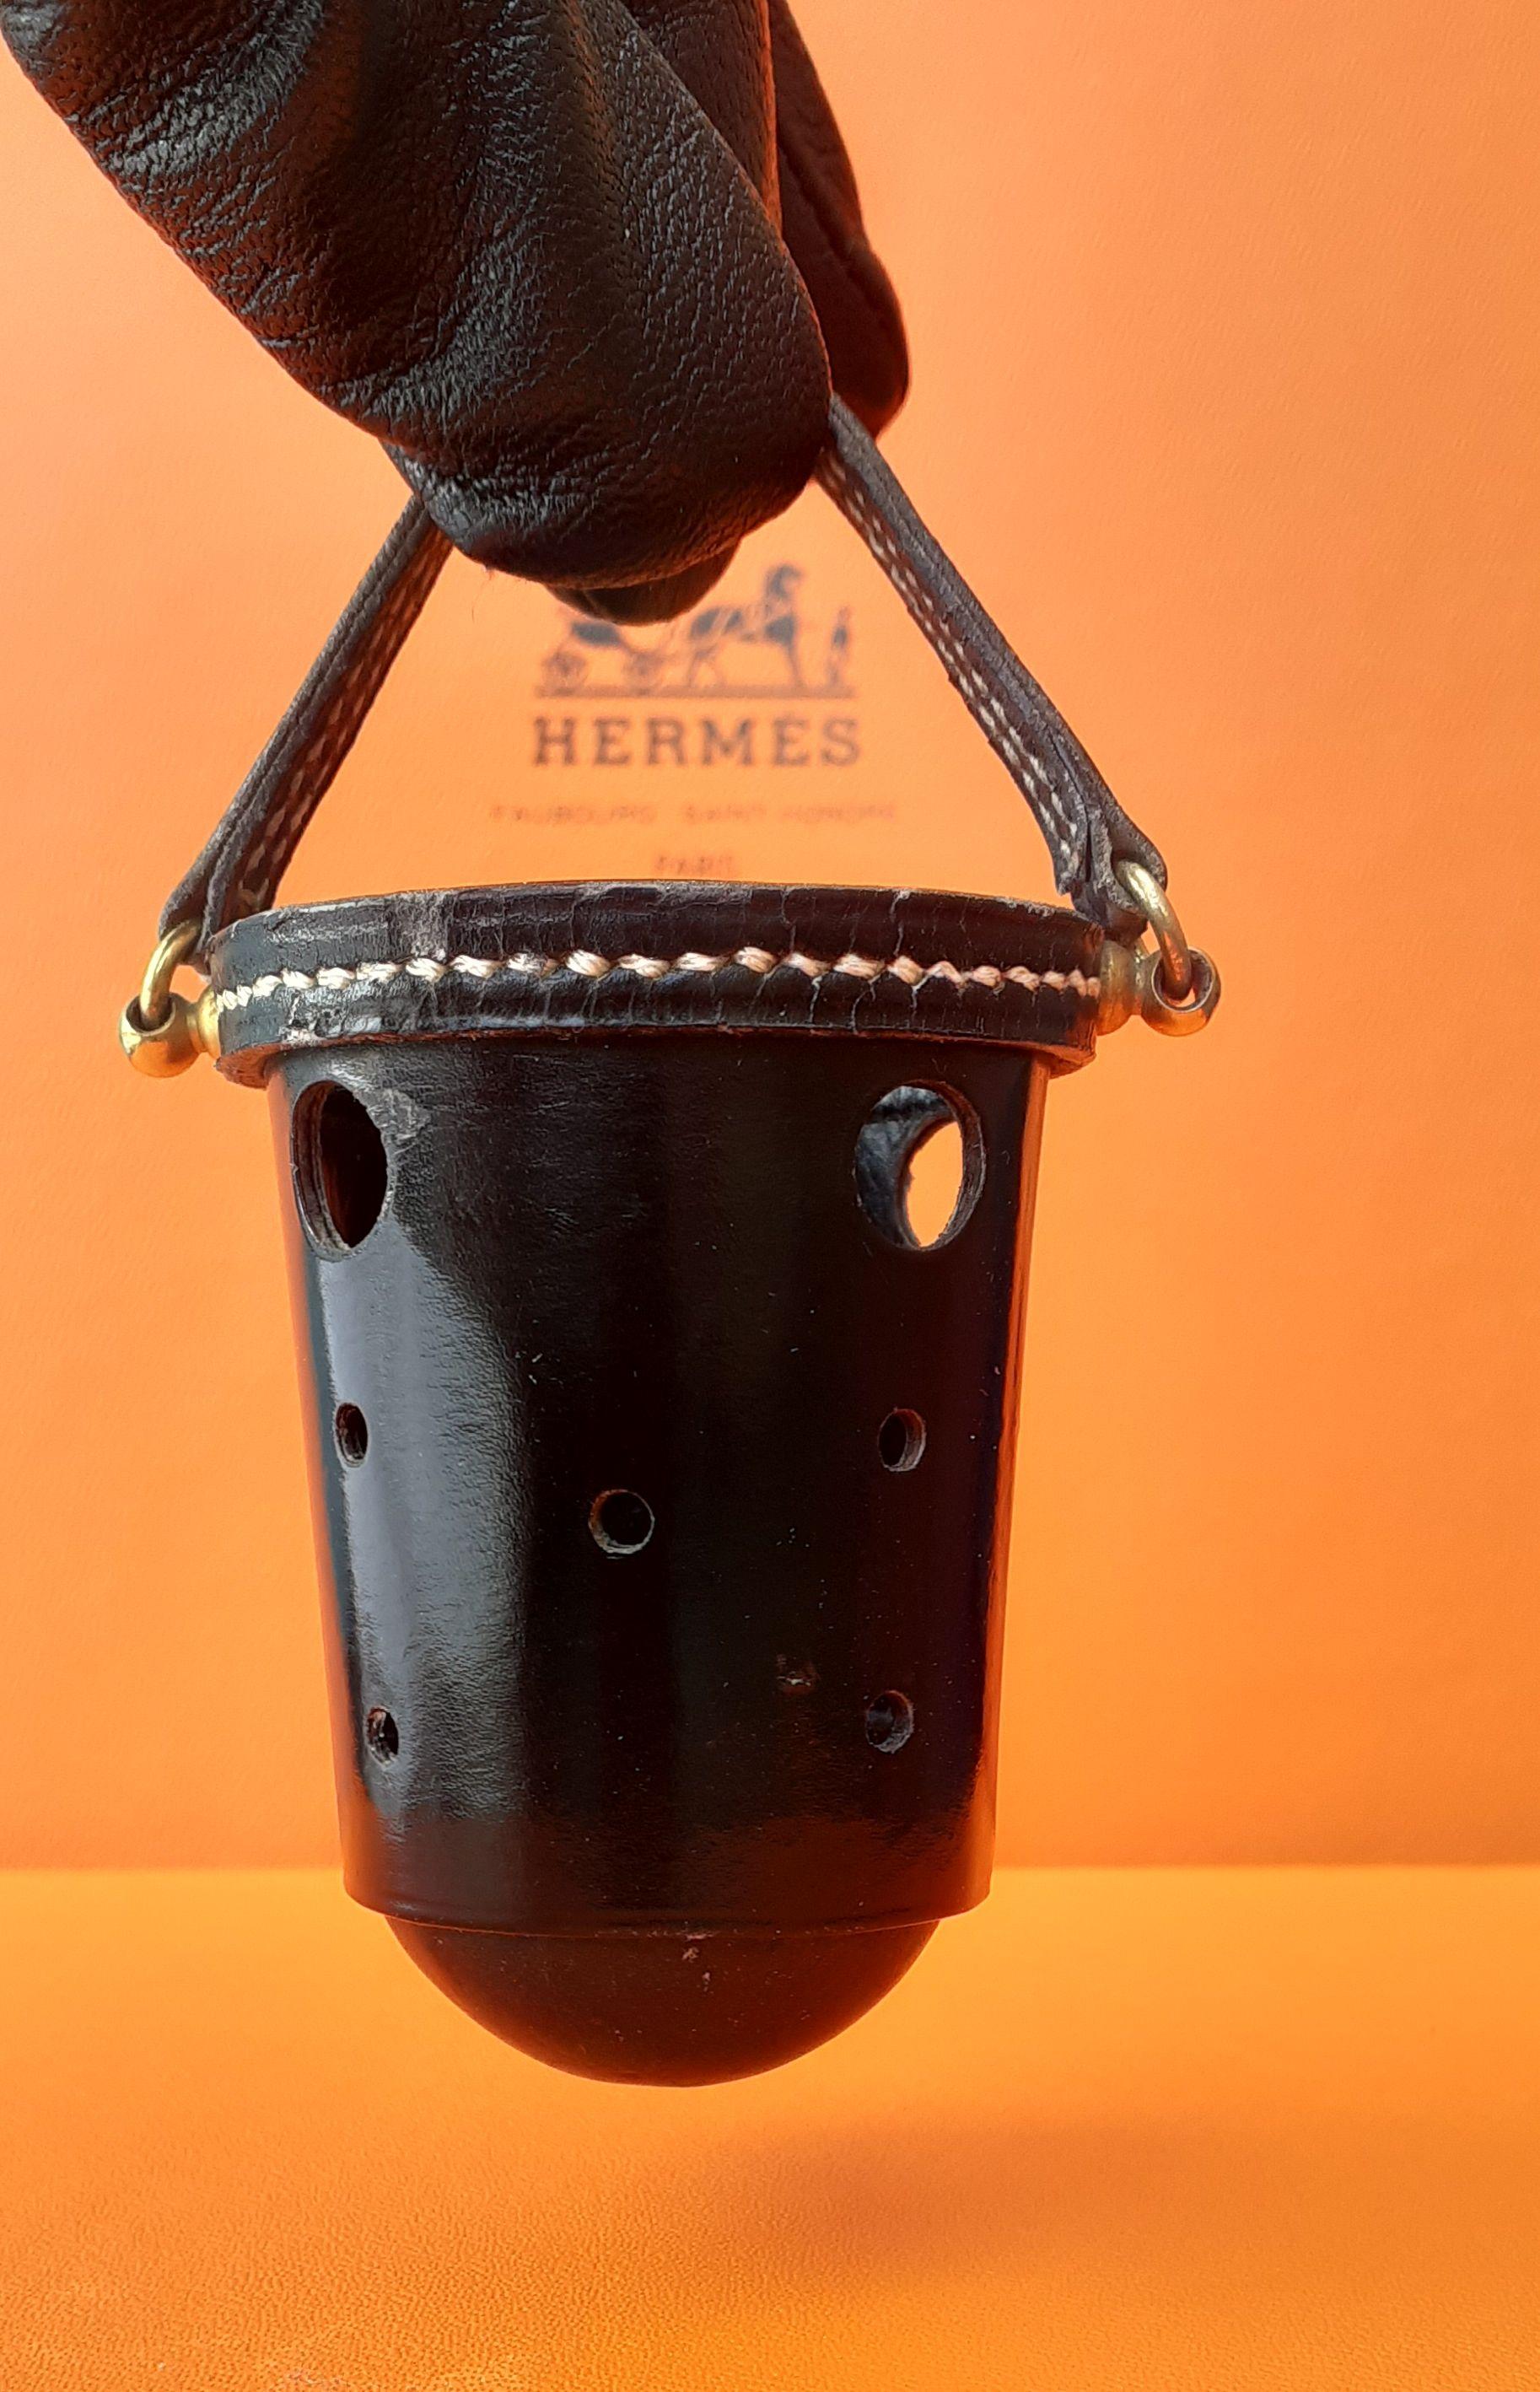 Super Cute Authentic Hermès Ashtray

The rounded bottom allows it not to fall, and the holes allow to hold the cigarettes

Can be hung thanks to its handle

Vintage Item 

Made of smooth leather and golden hardware

Colorway: Black, White